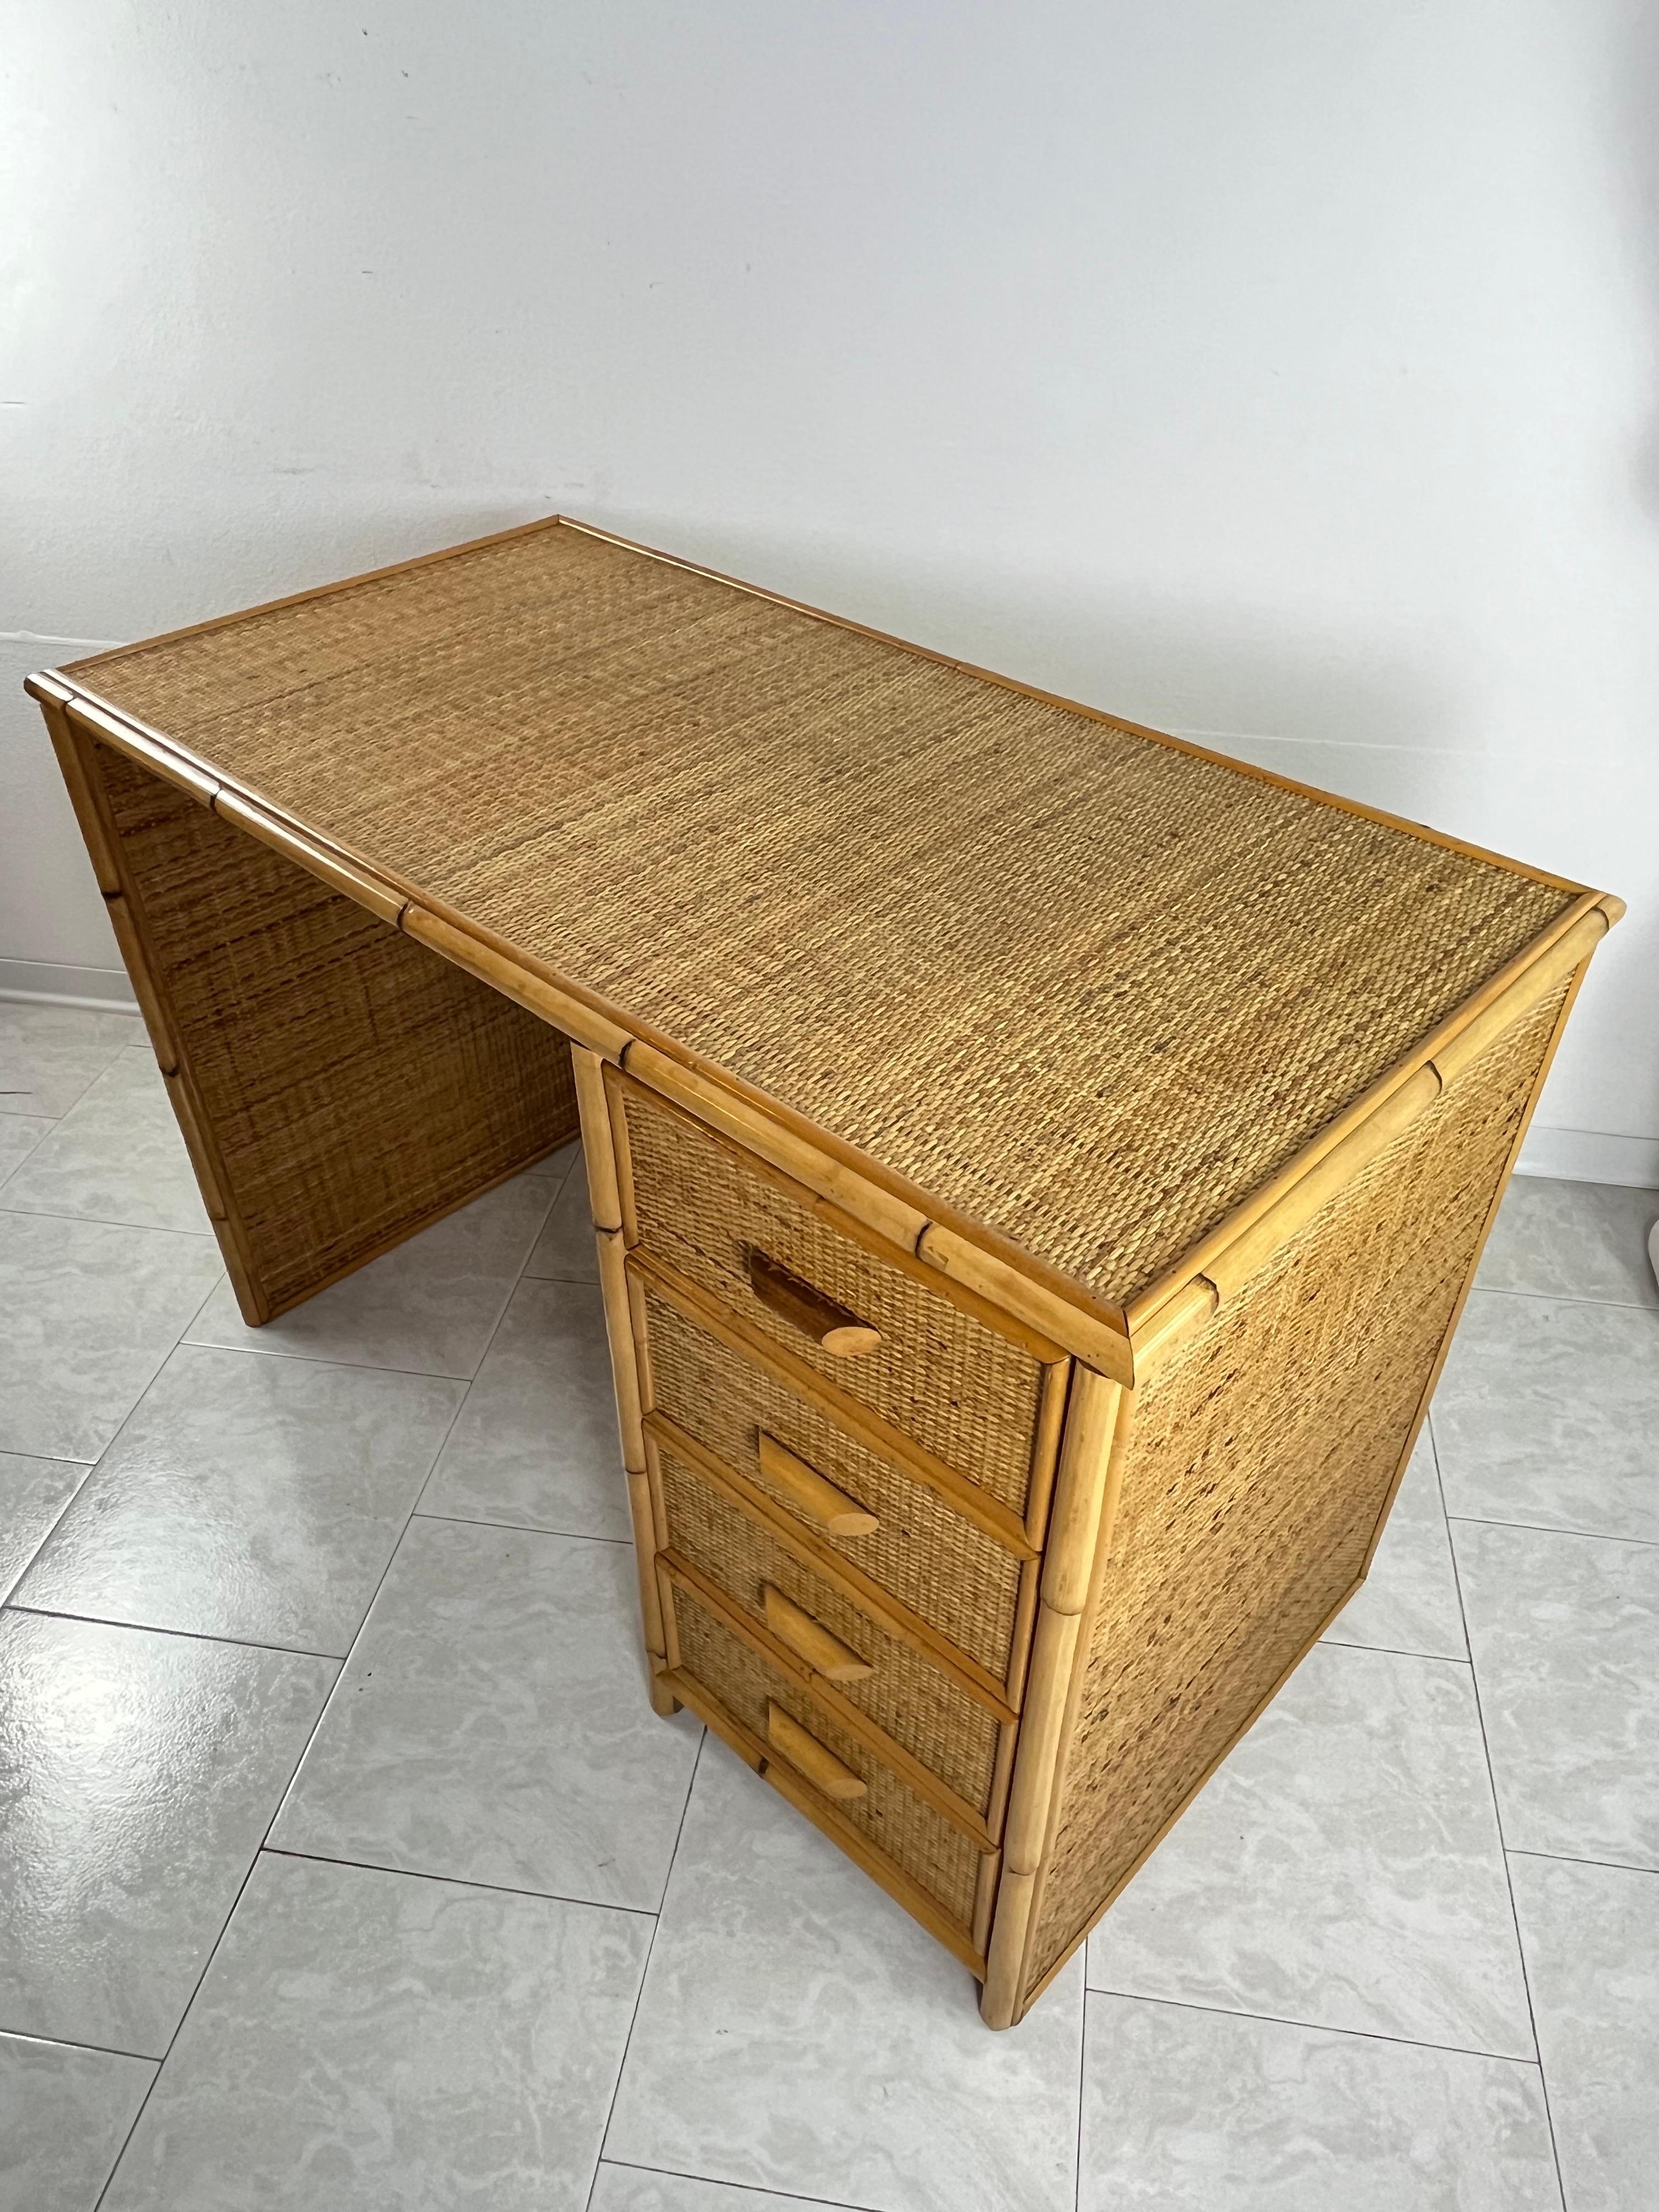 Italian Mid-Century Rattan Wicker And Bamboo Desk Attributed To Dal Vera 1960s For Sale